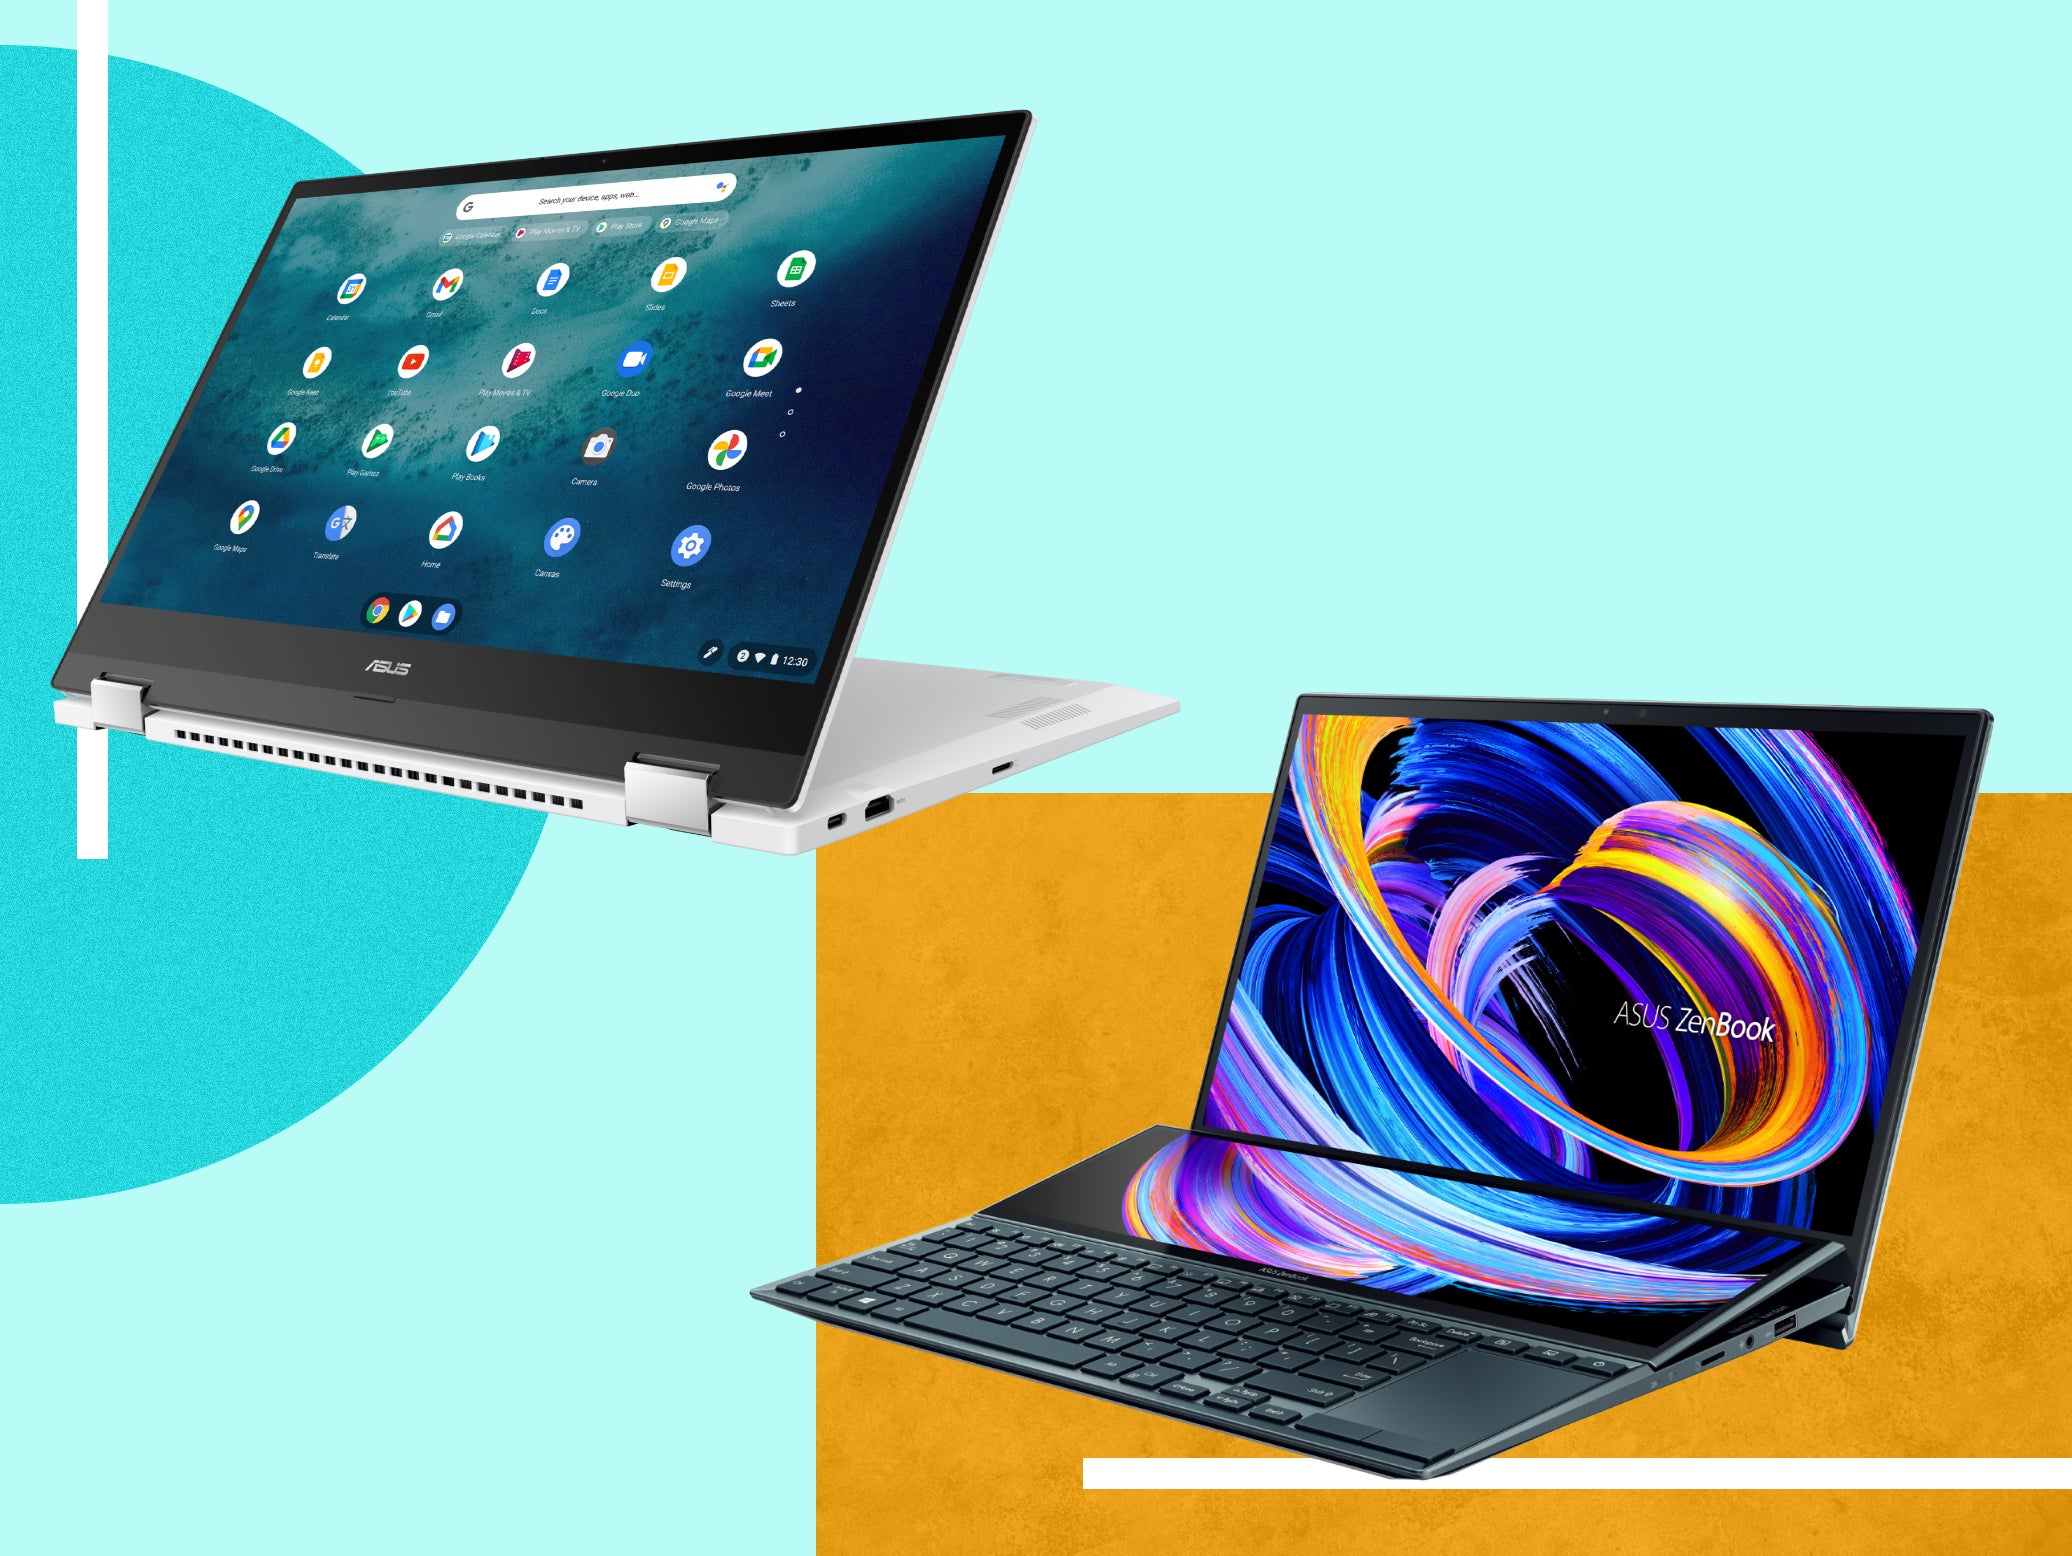 Best Asus laptop 2021: Vivobook, Zenbook and more tried and tested reviews